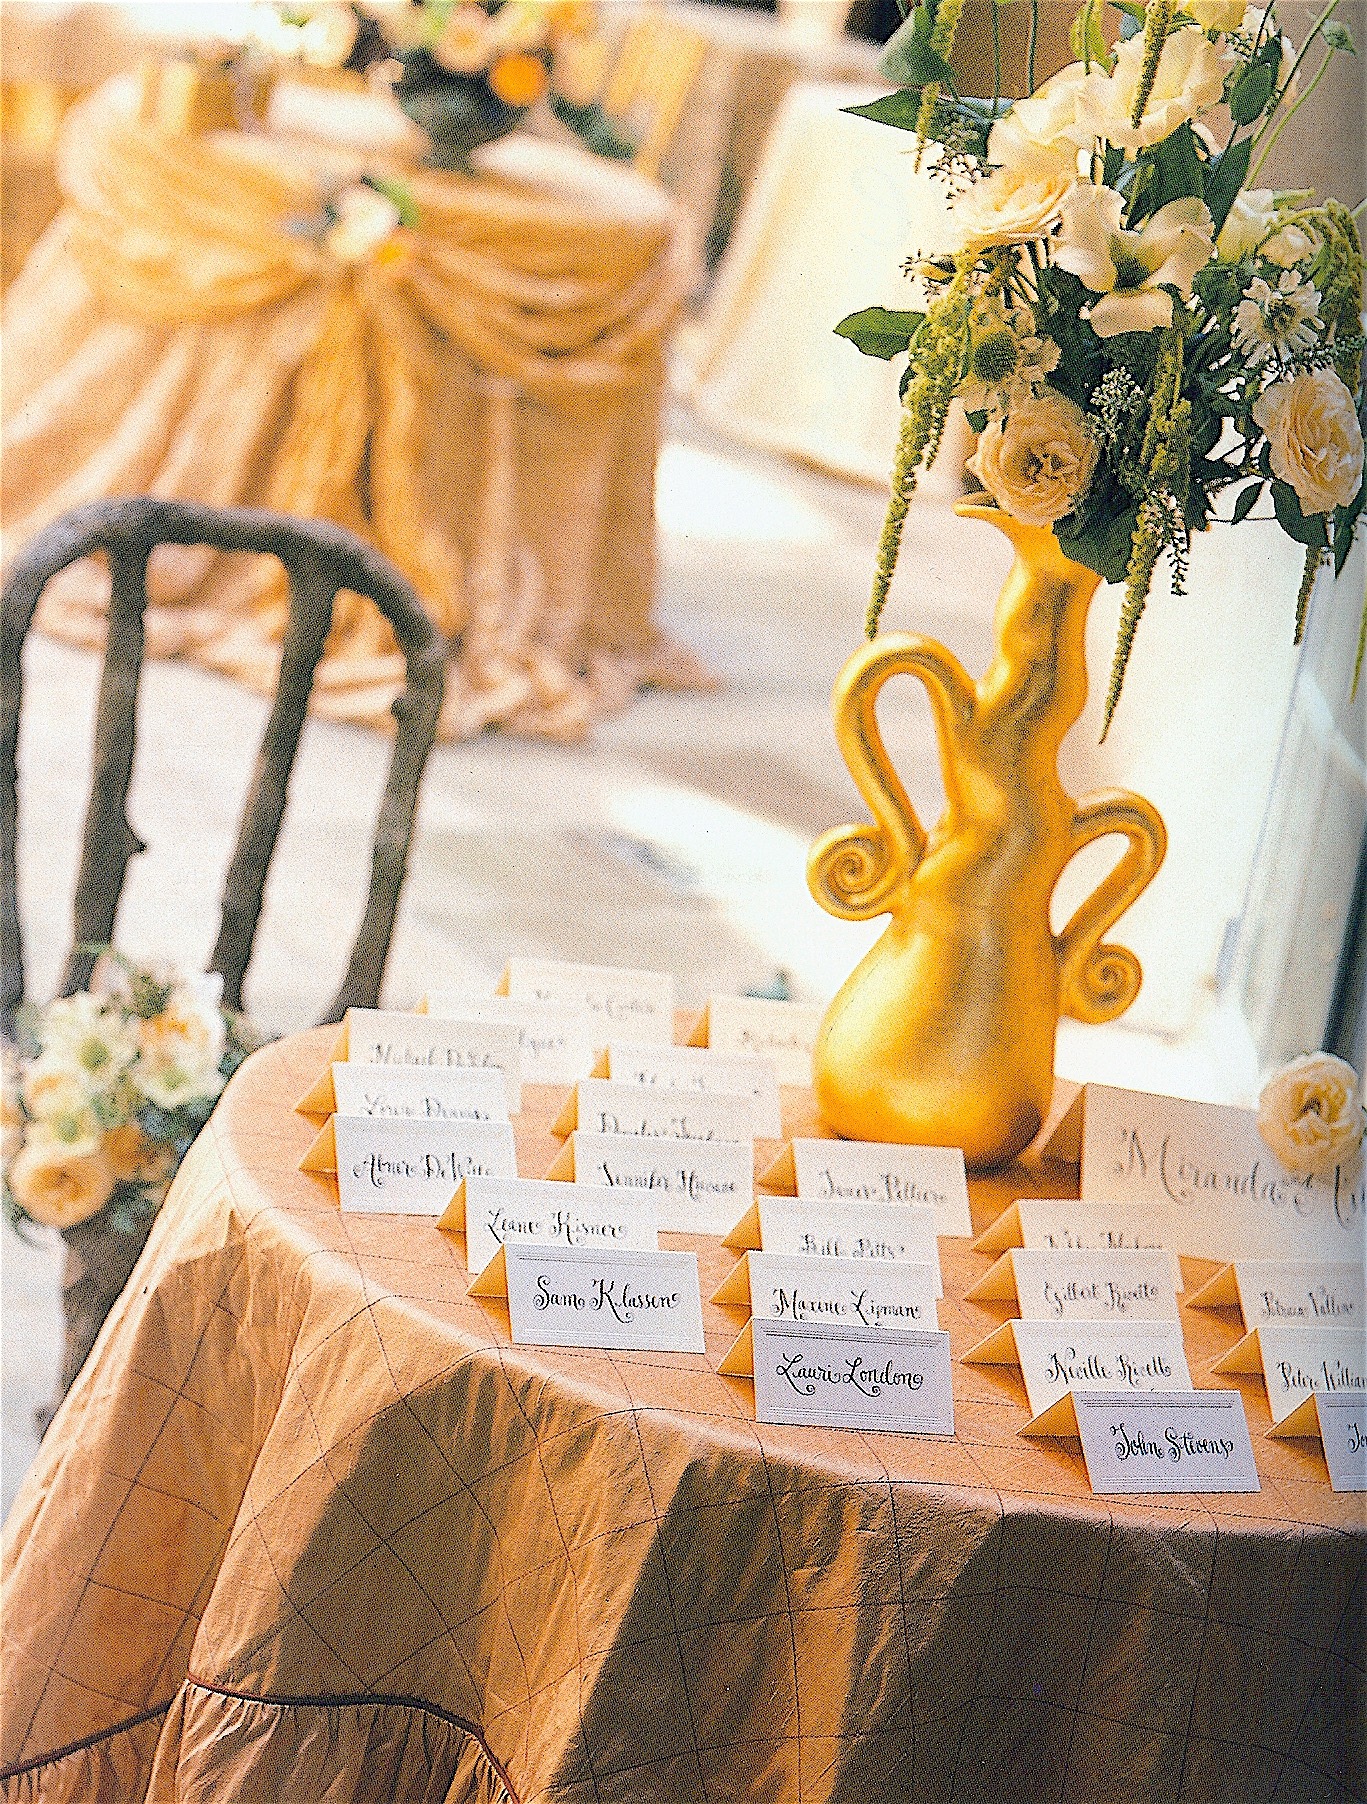 Coffin & King Press - Coffin & King Gilded Vase featured in The Perfect Wedding